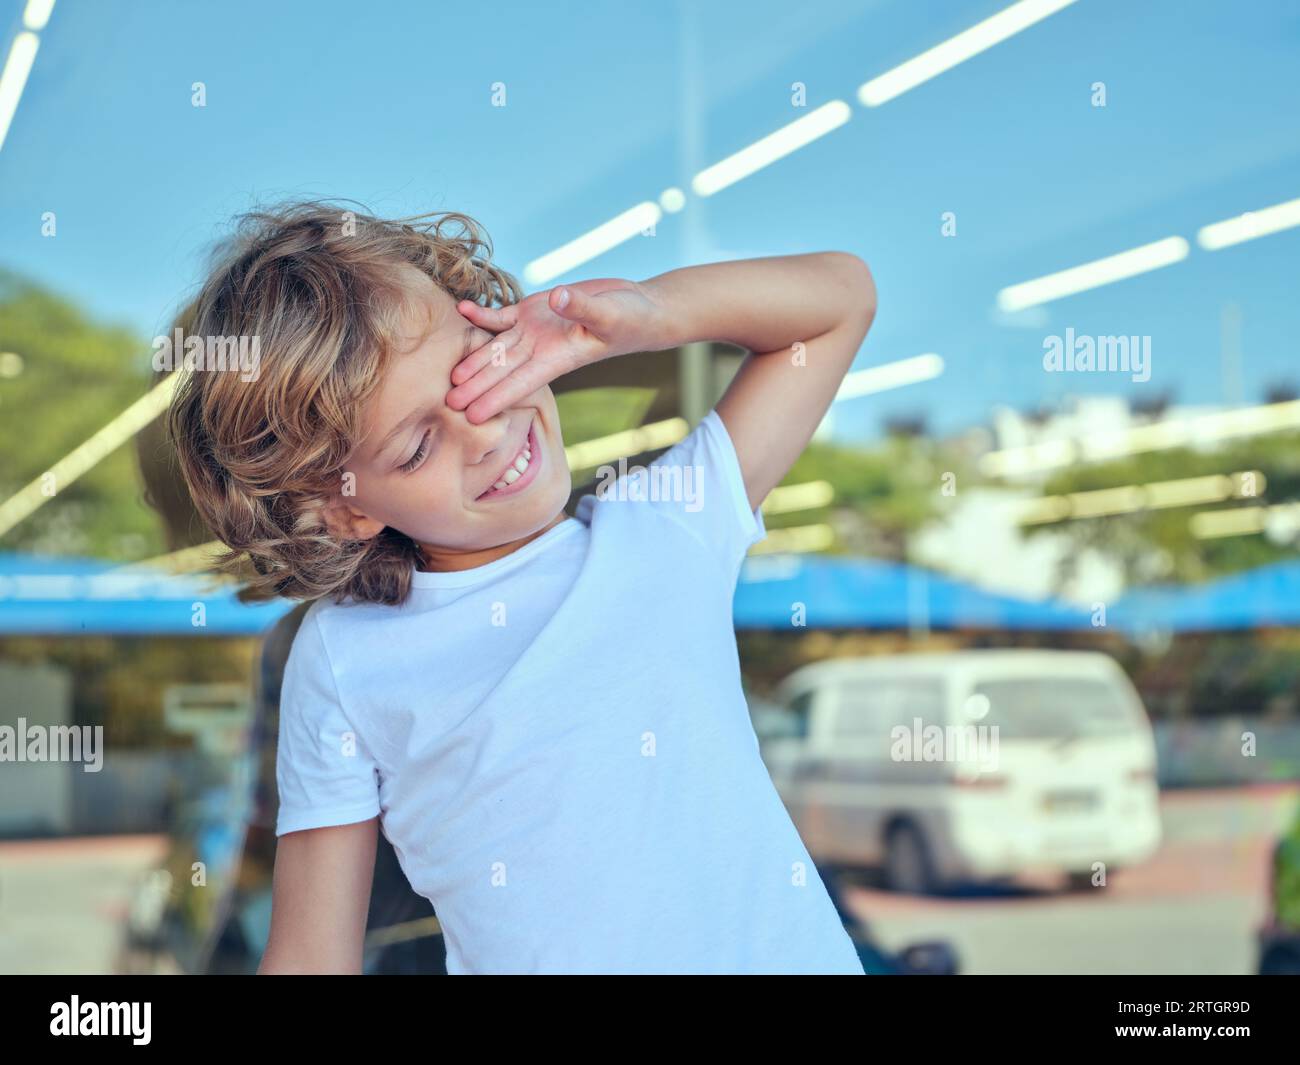 Portrait of positive child in casual clothes standing on street against window and rubbing eye while enjoying bright summer day Stock Photo